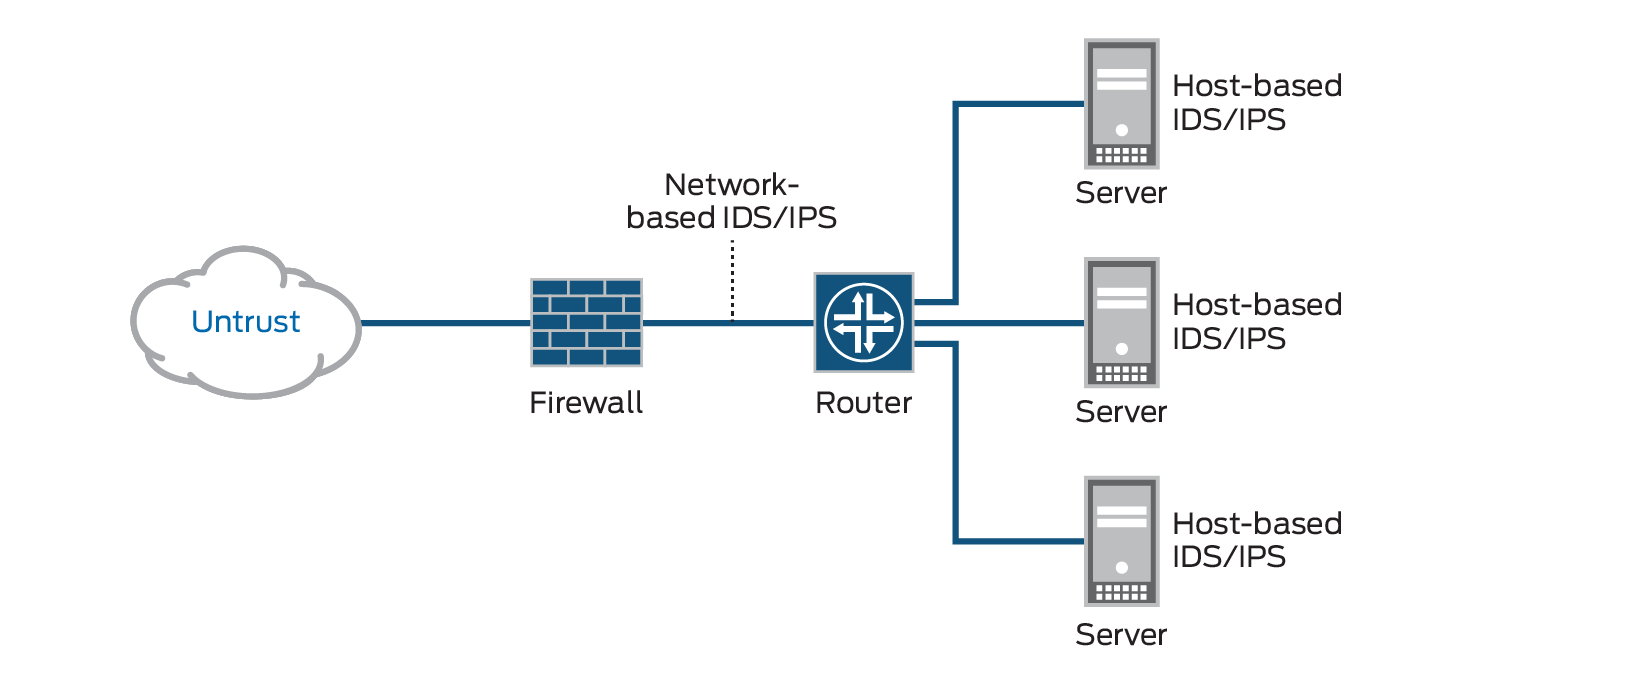 what is the difference between an hids and a firewall